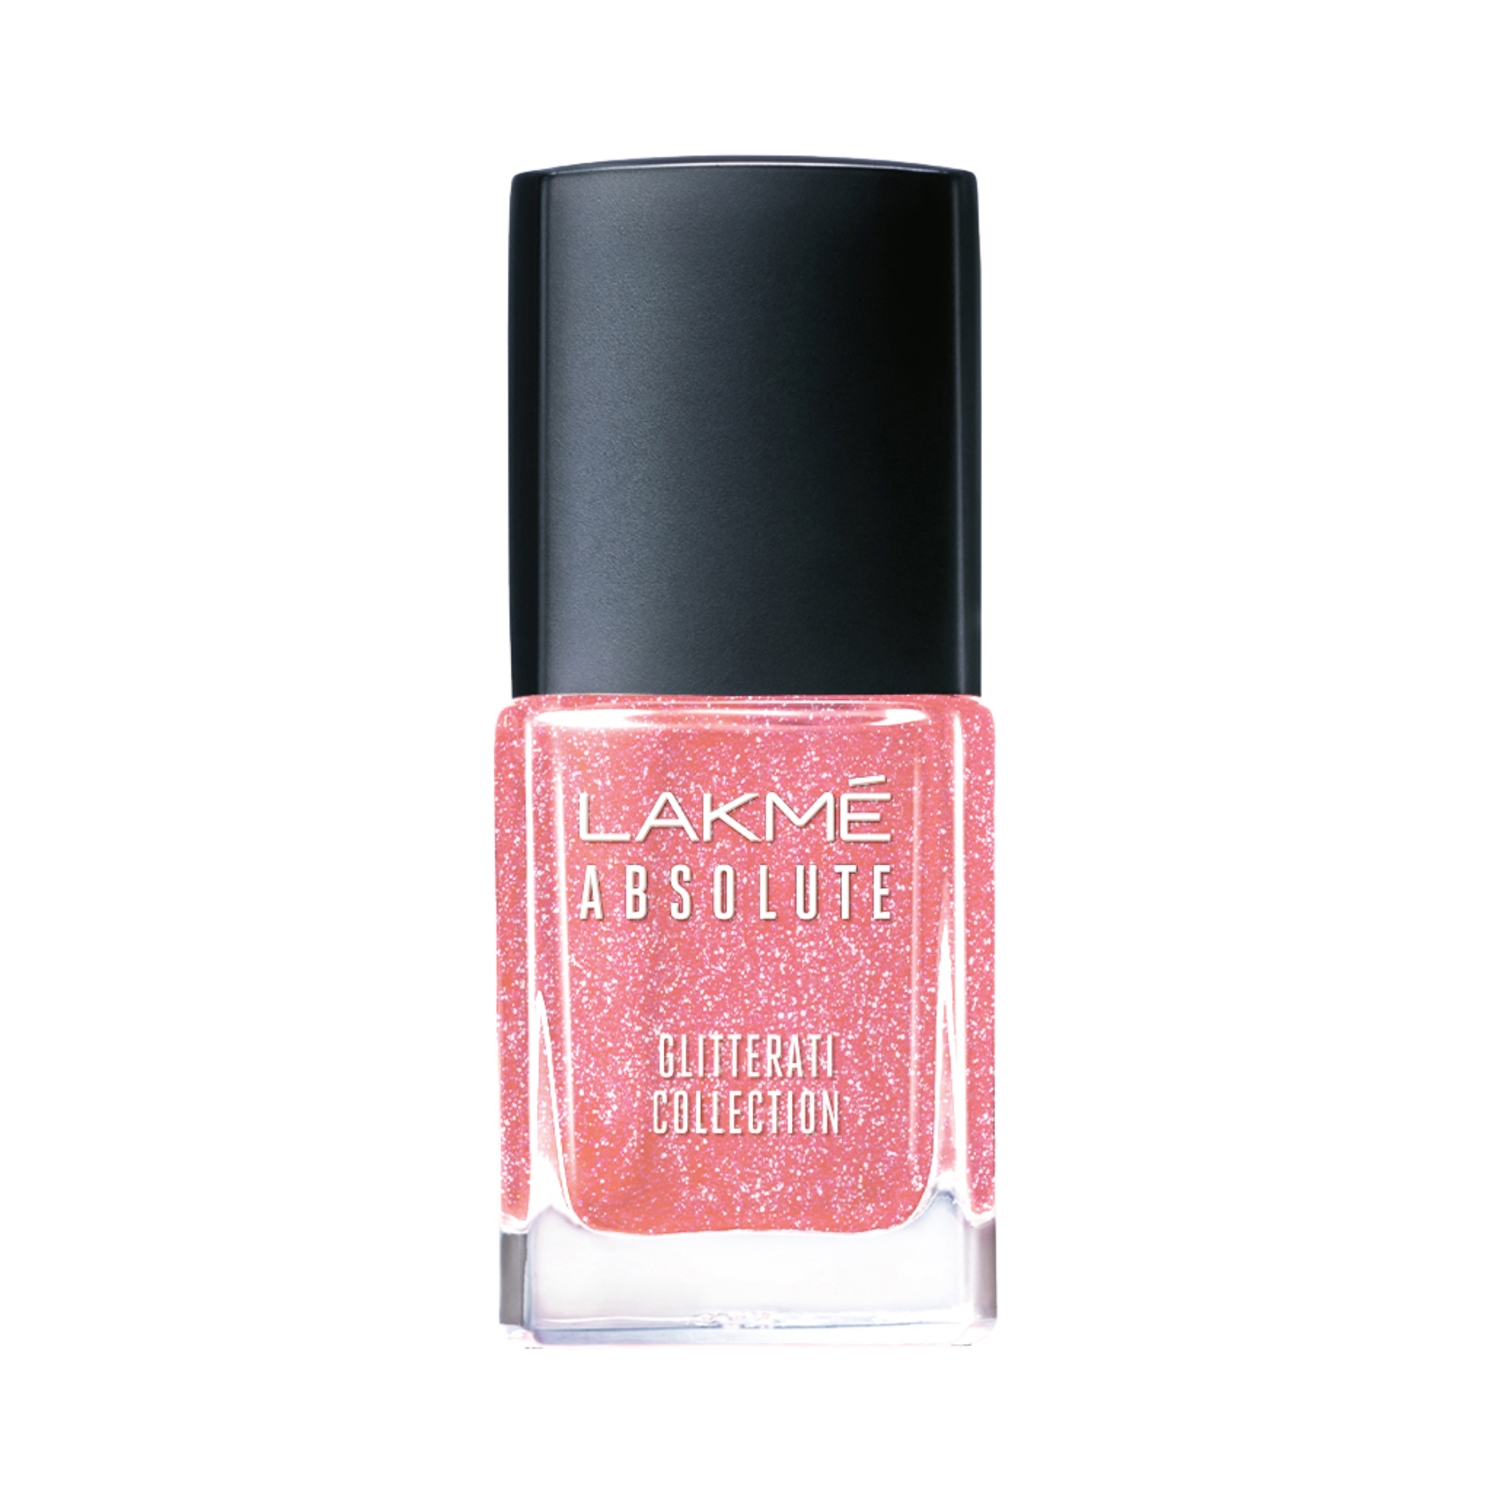 Buy Lakmé Absolute Gel Stylist Nail Paint with intense gloss finish | Set  of 3 - Pink Date 12ml, Ballerina 12ml & Pink Lady 12ml Online at Low Prices  in India - Amazon.in